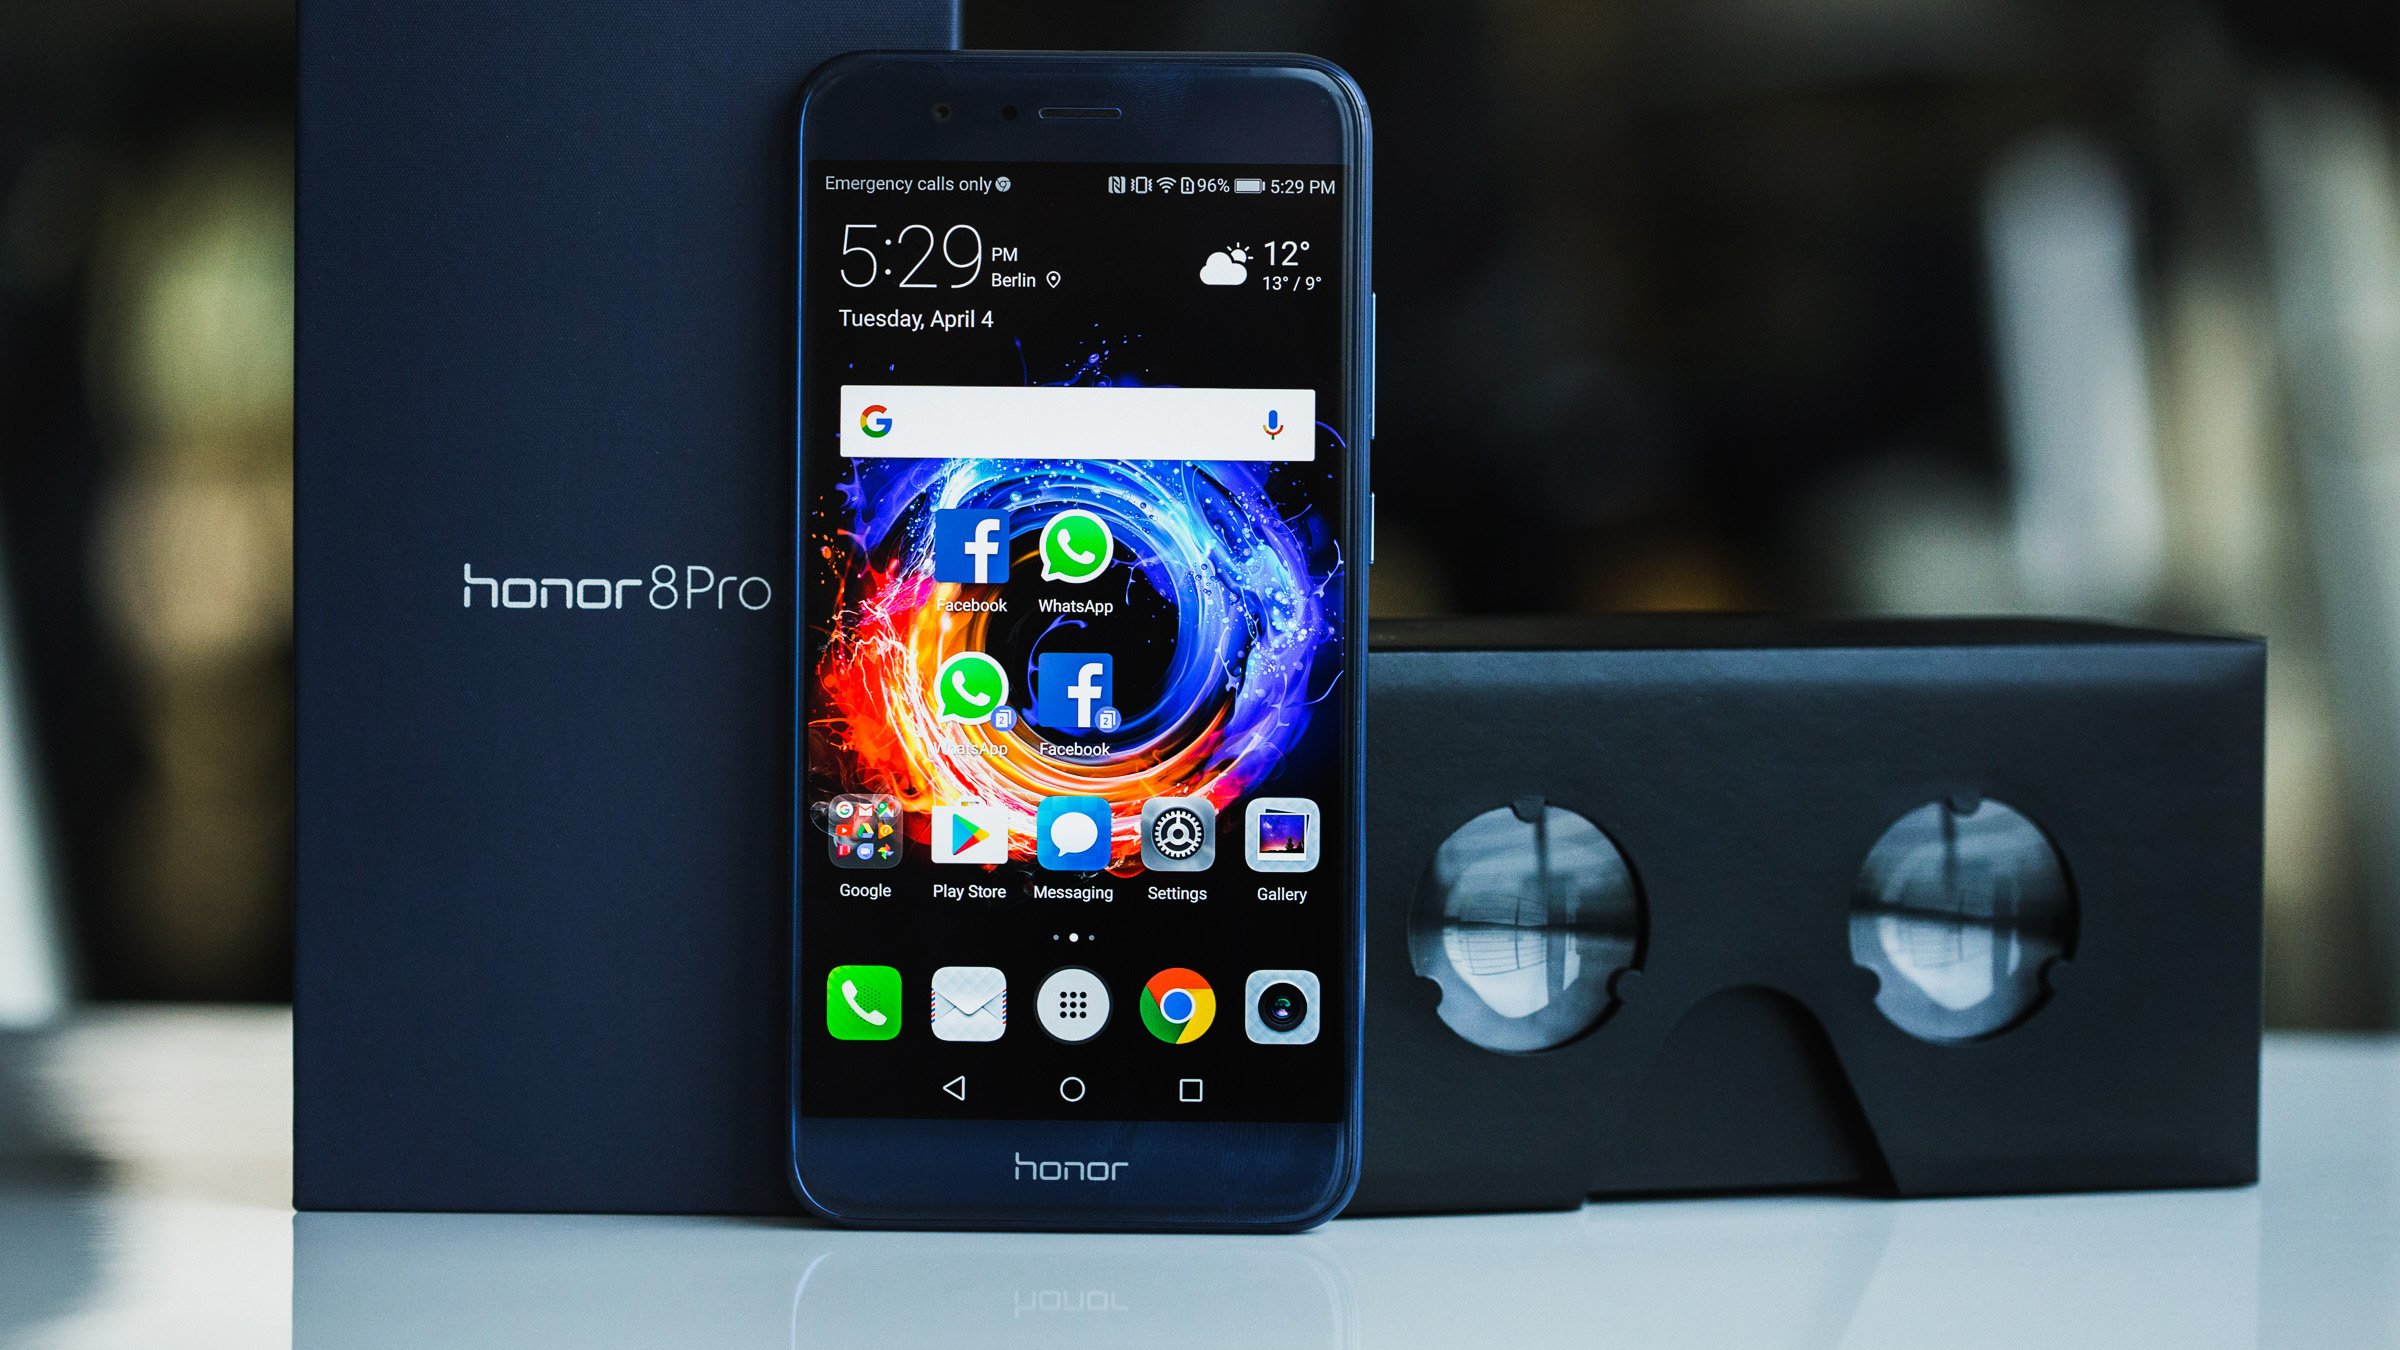 Huawei Honor 8 Pro comes with Google Cardboard 